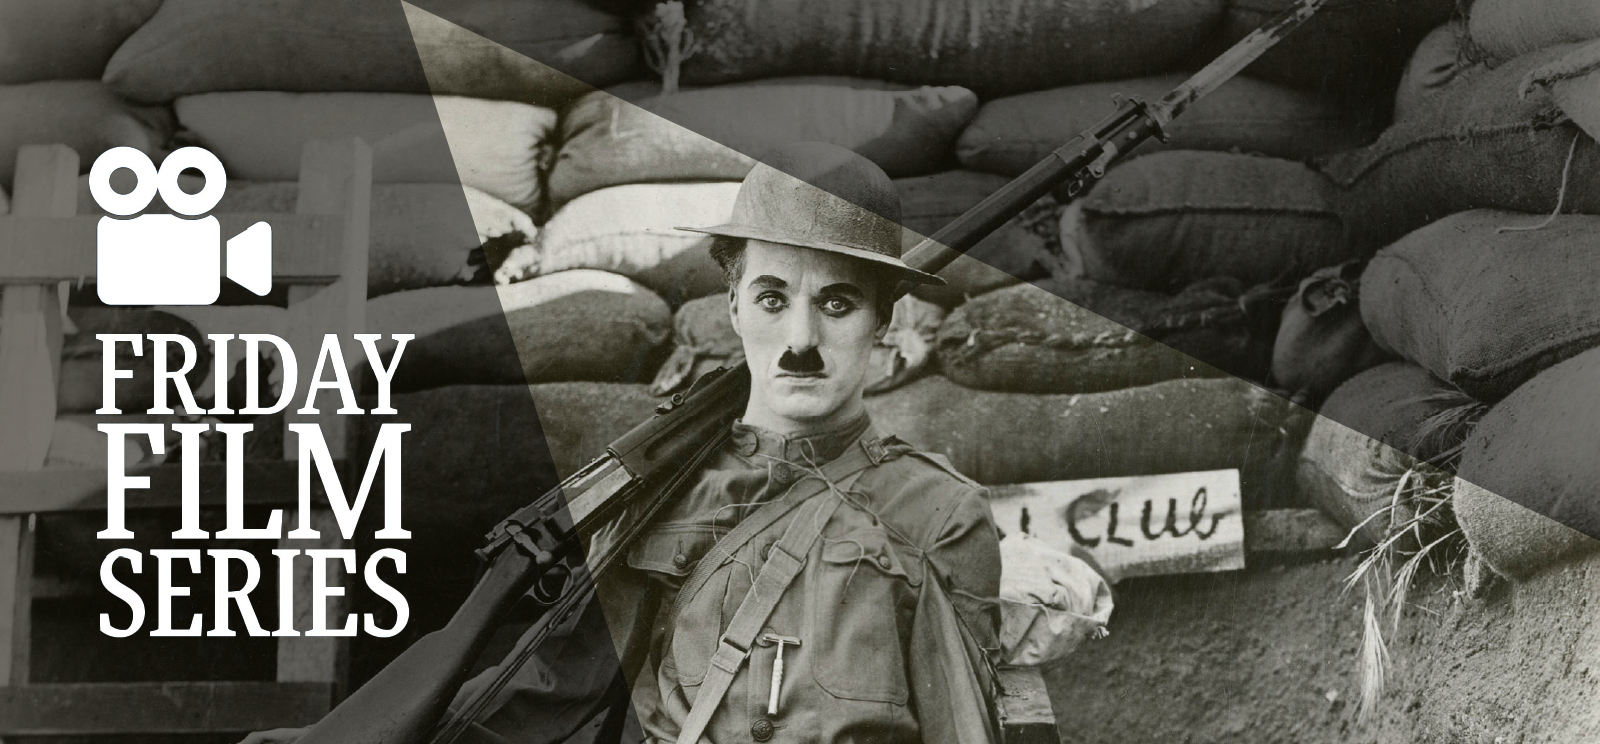 Black and white promotional still of Charlie Chaplin dressed in WWI uniform with a rifle over his shoulder standing in a trench. Text: Friday Film Series